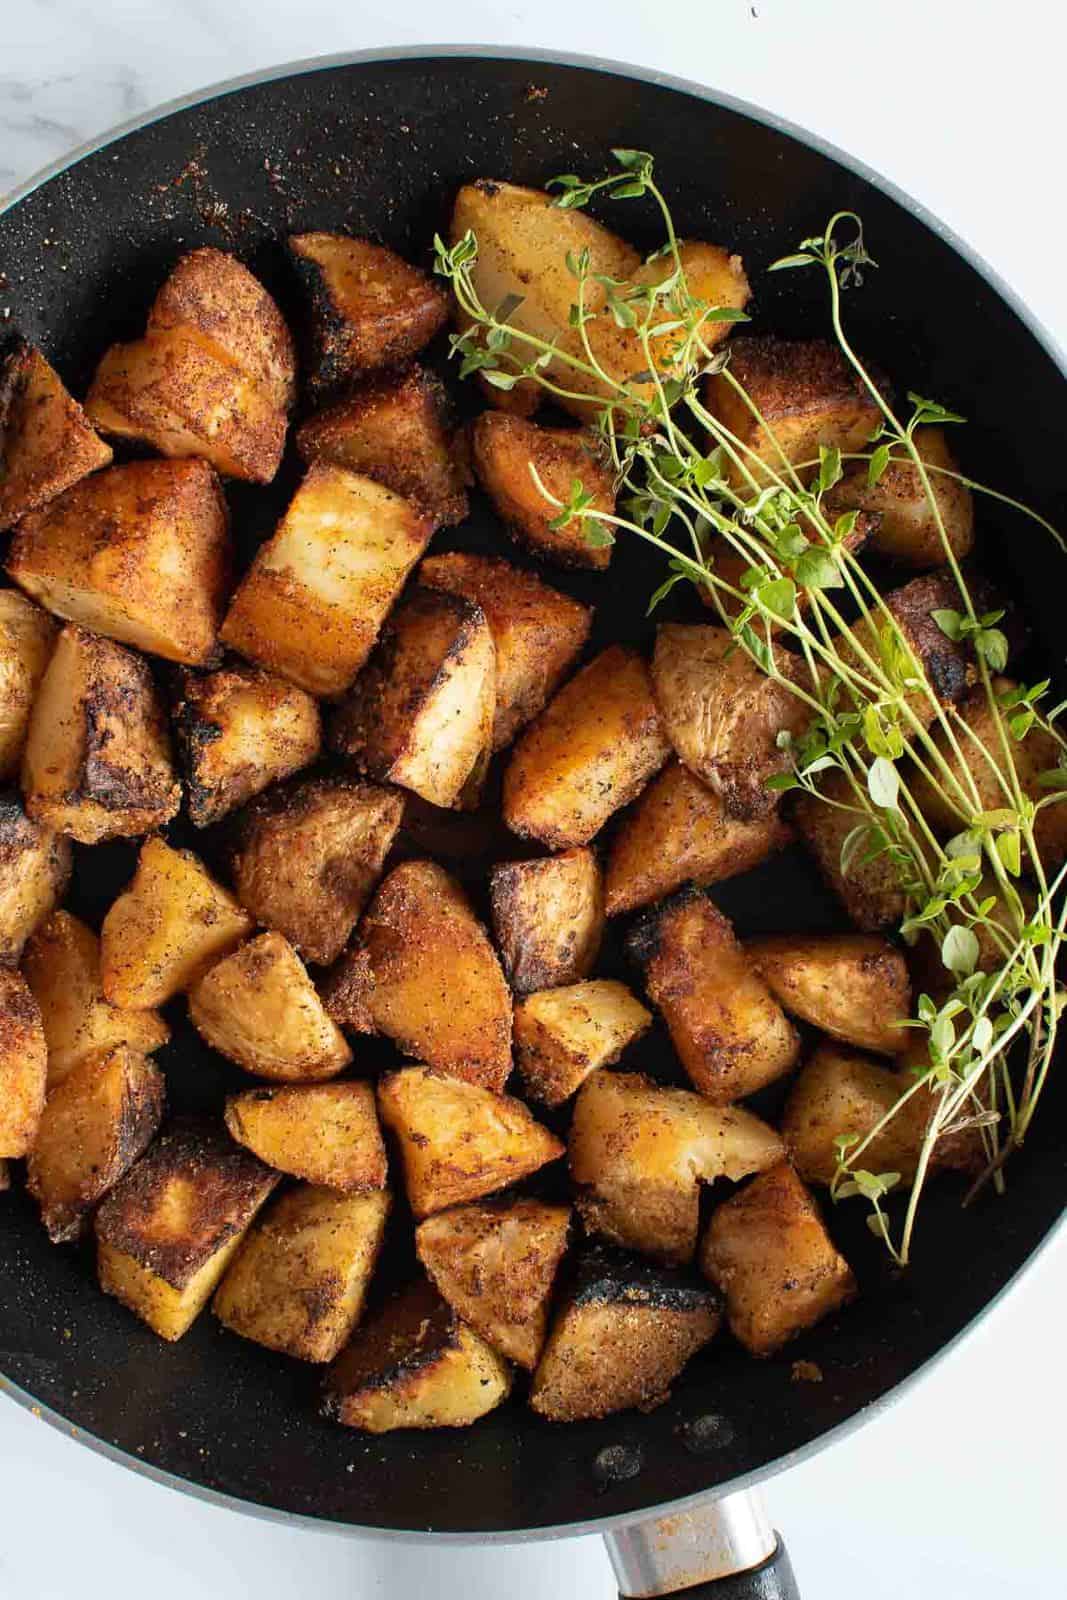 Golden sauteed potatoes in a frying pan, with fresh thyme on the side.